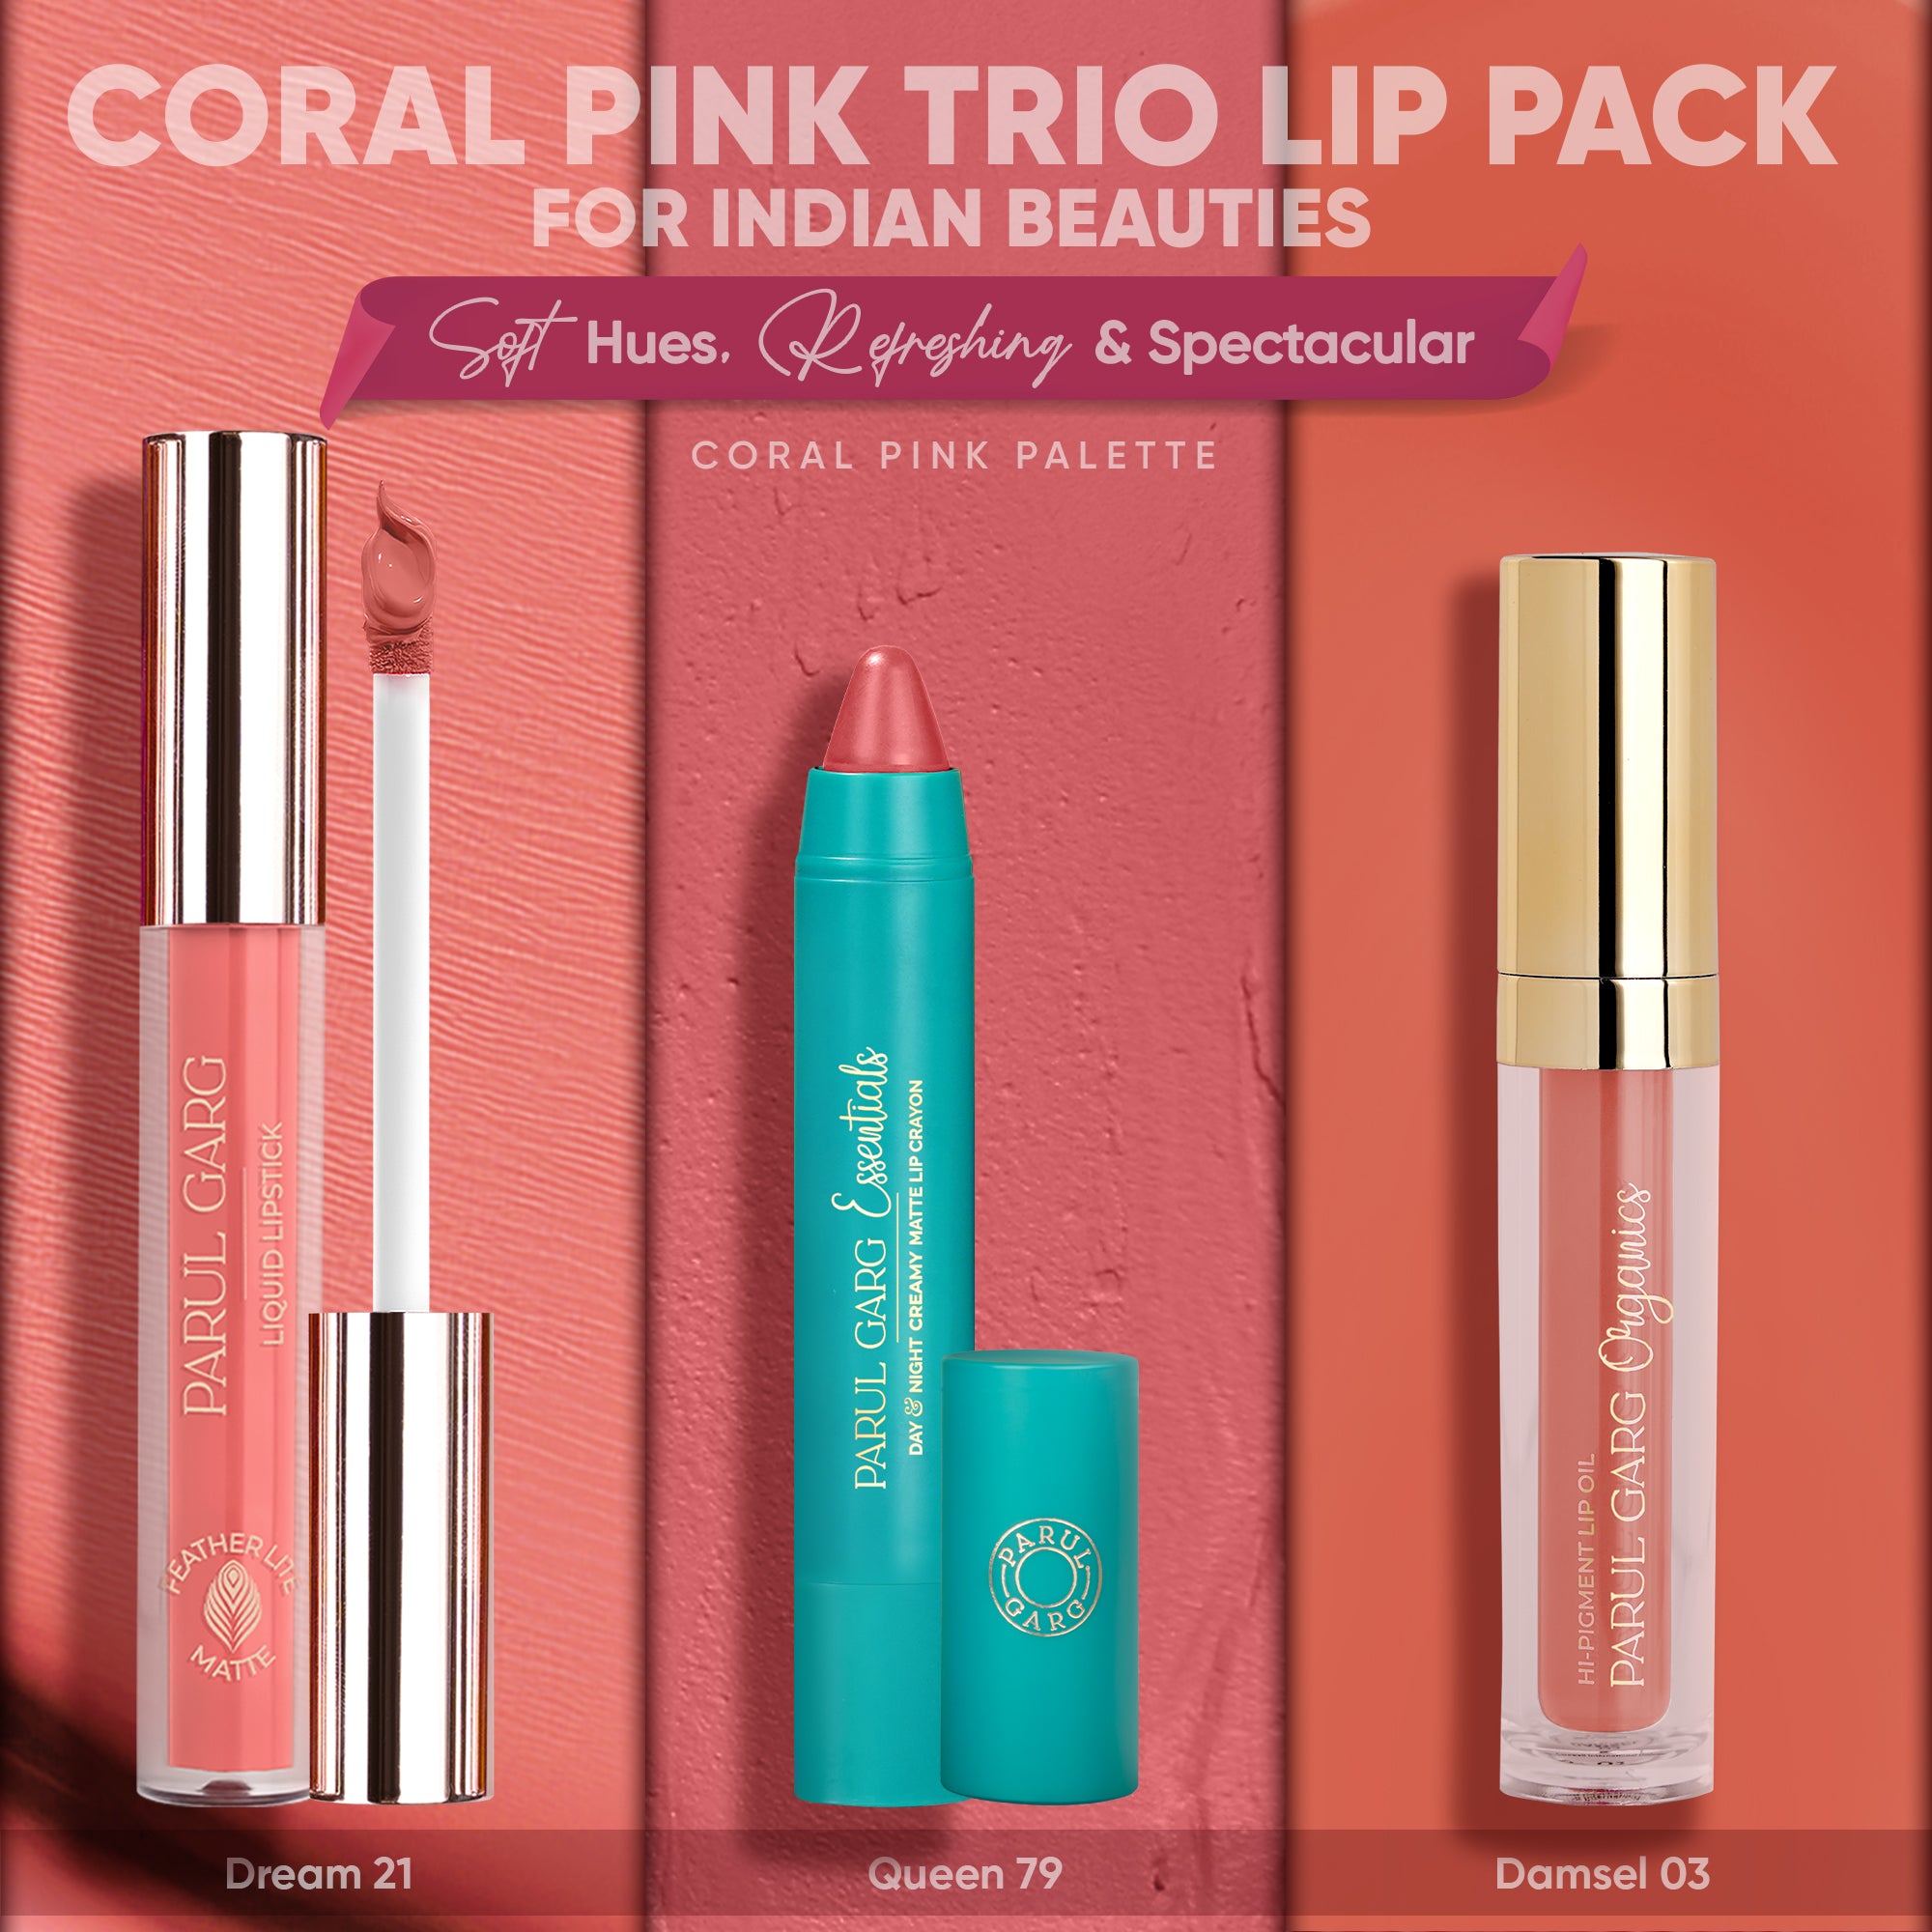 Coral Pink Trio Lip Pack for Indian Beauties